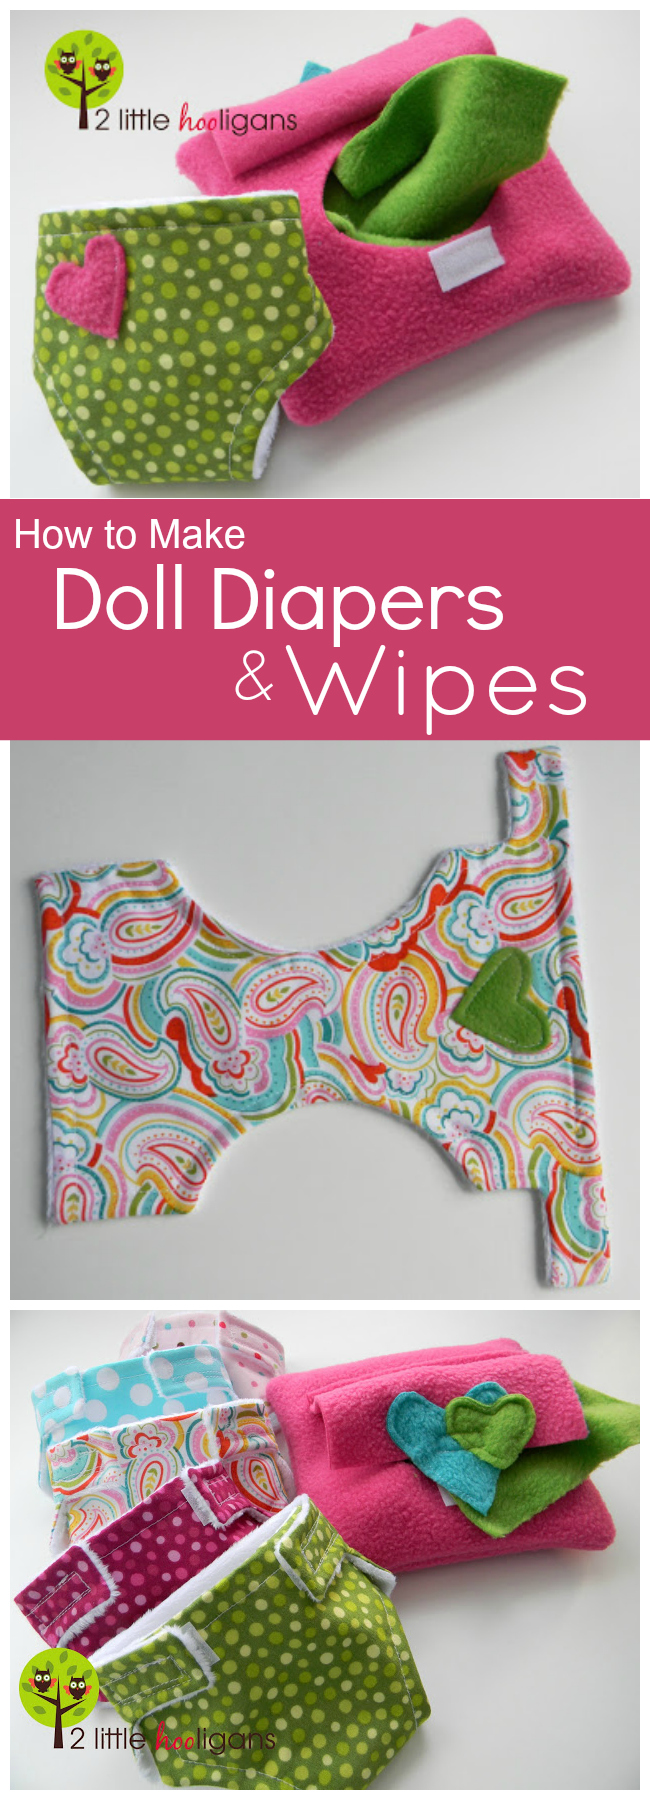 How to make doll diapers and wipes tutorial. These make great handmade gifts for little girls!